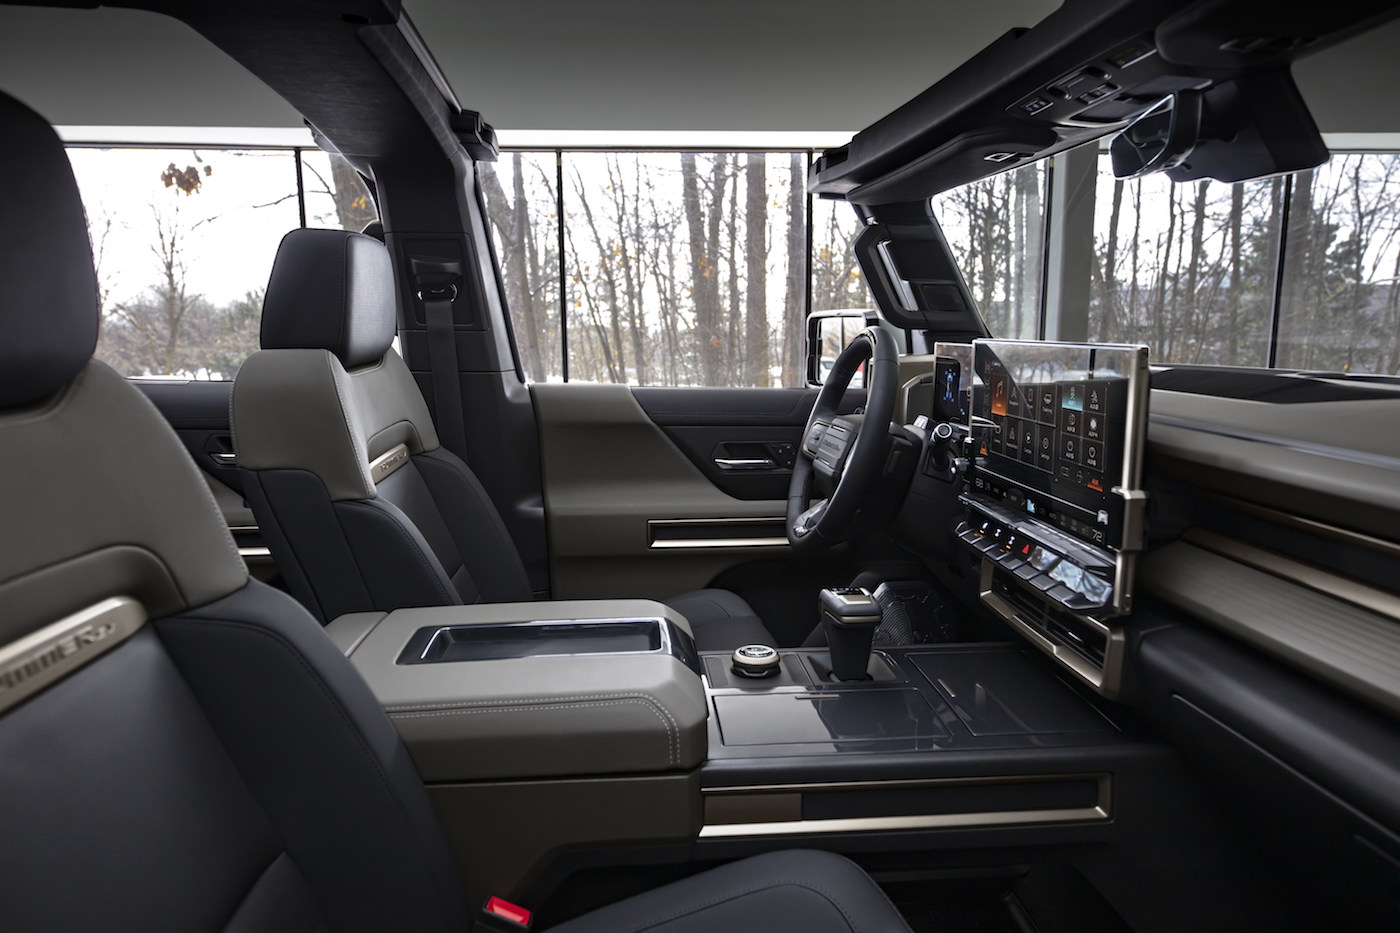 The GMC HUMMER EV SUV debuts in the lowcontrast Lunar Shadow interior